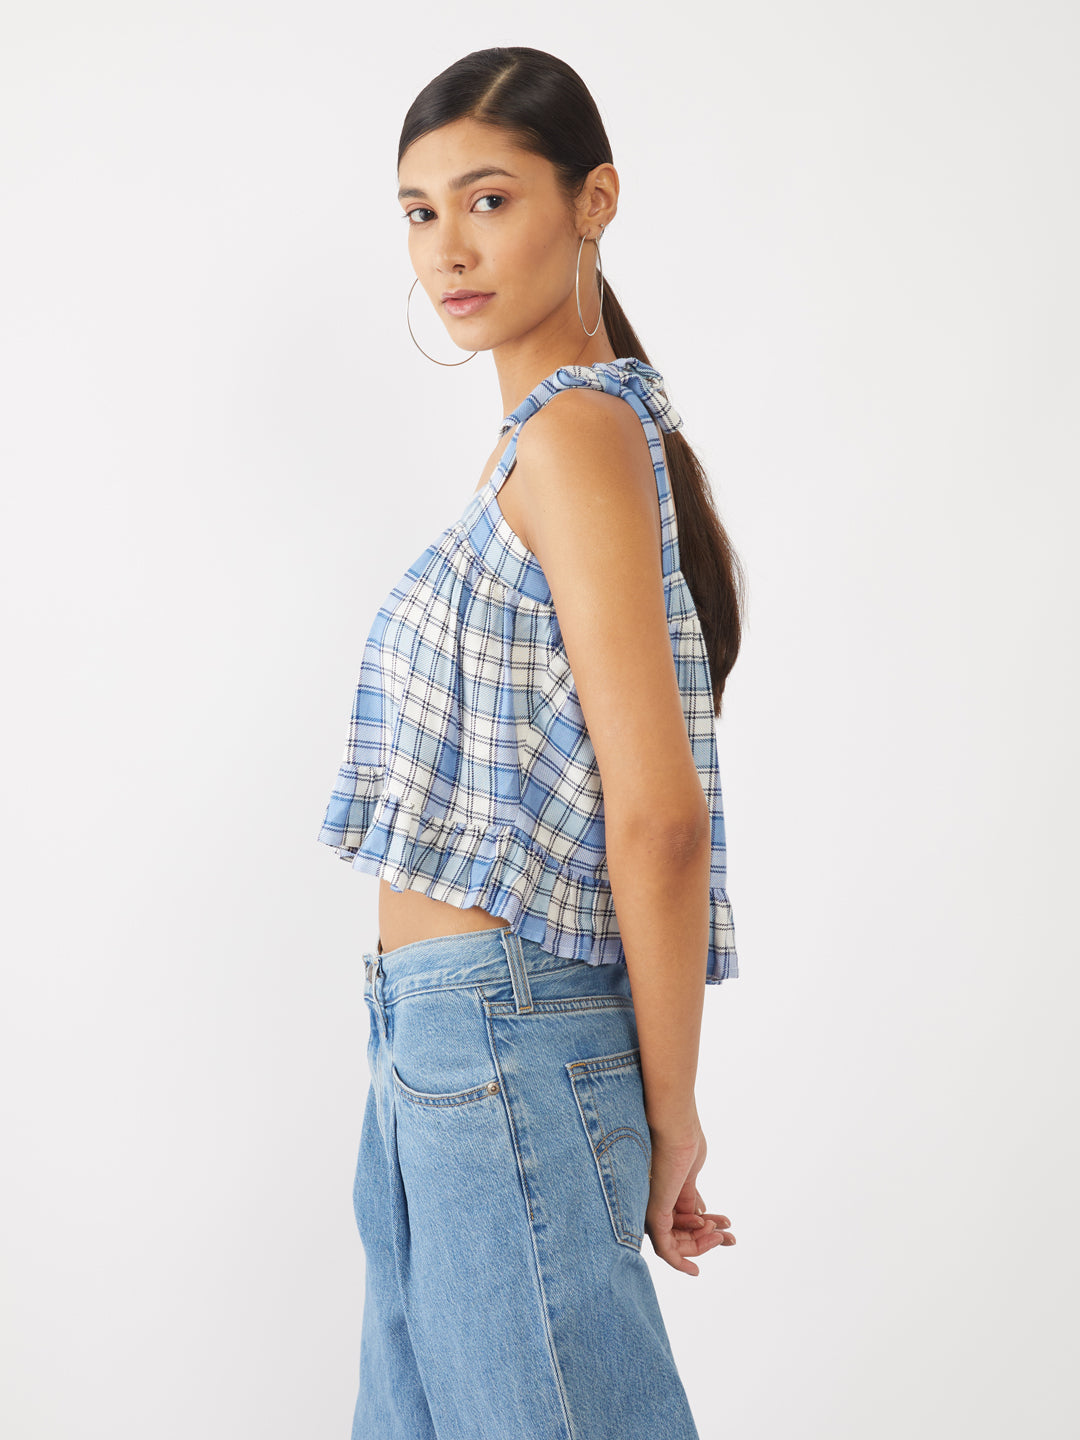 Blue & White Checkered Top for Women